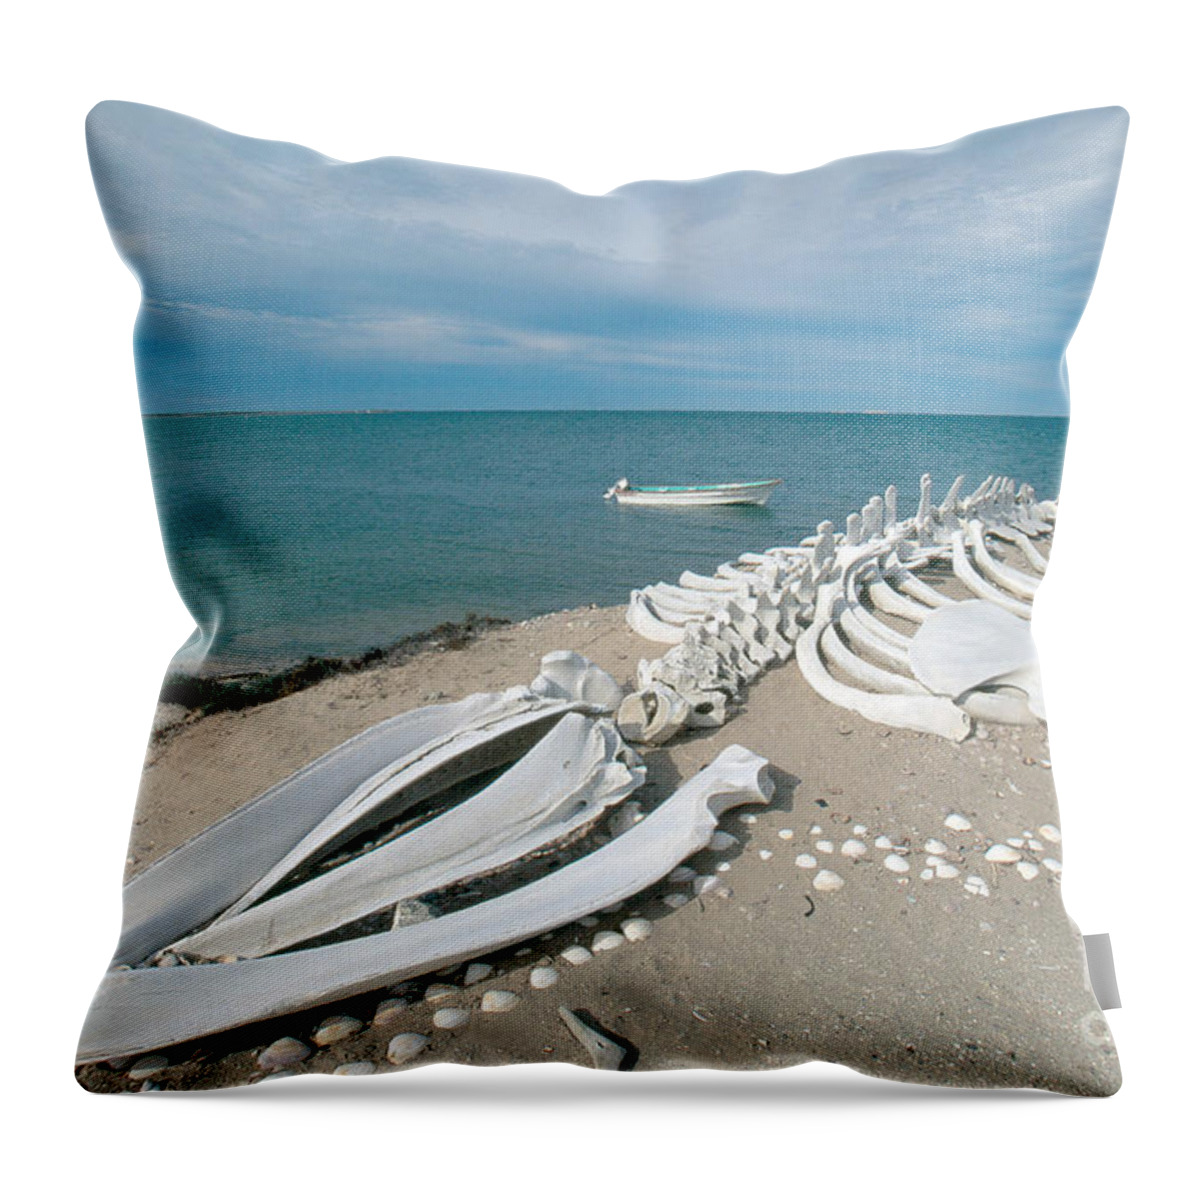 Gray Whale Throw Pillow featuring the photograph Gray Whale Skeleton by William H. Mullins